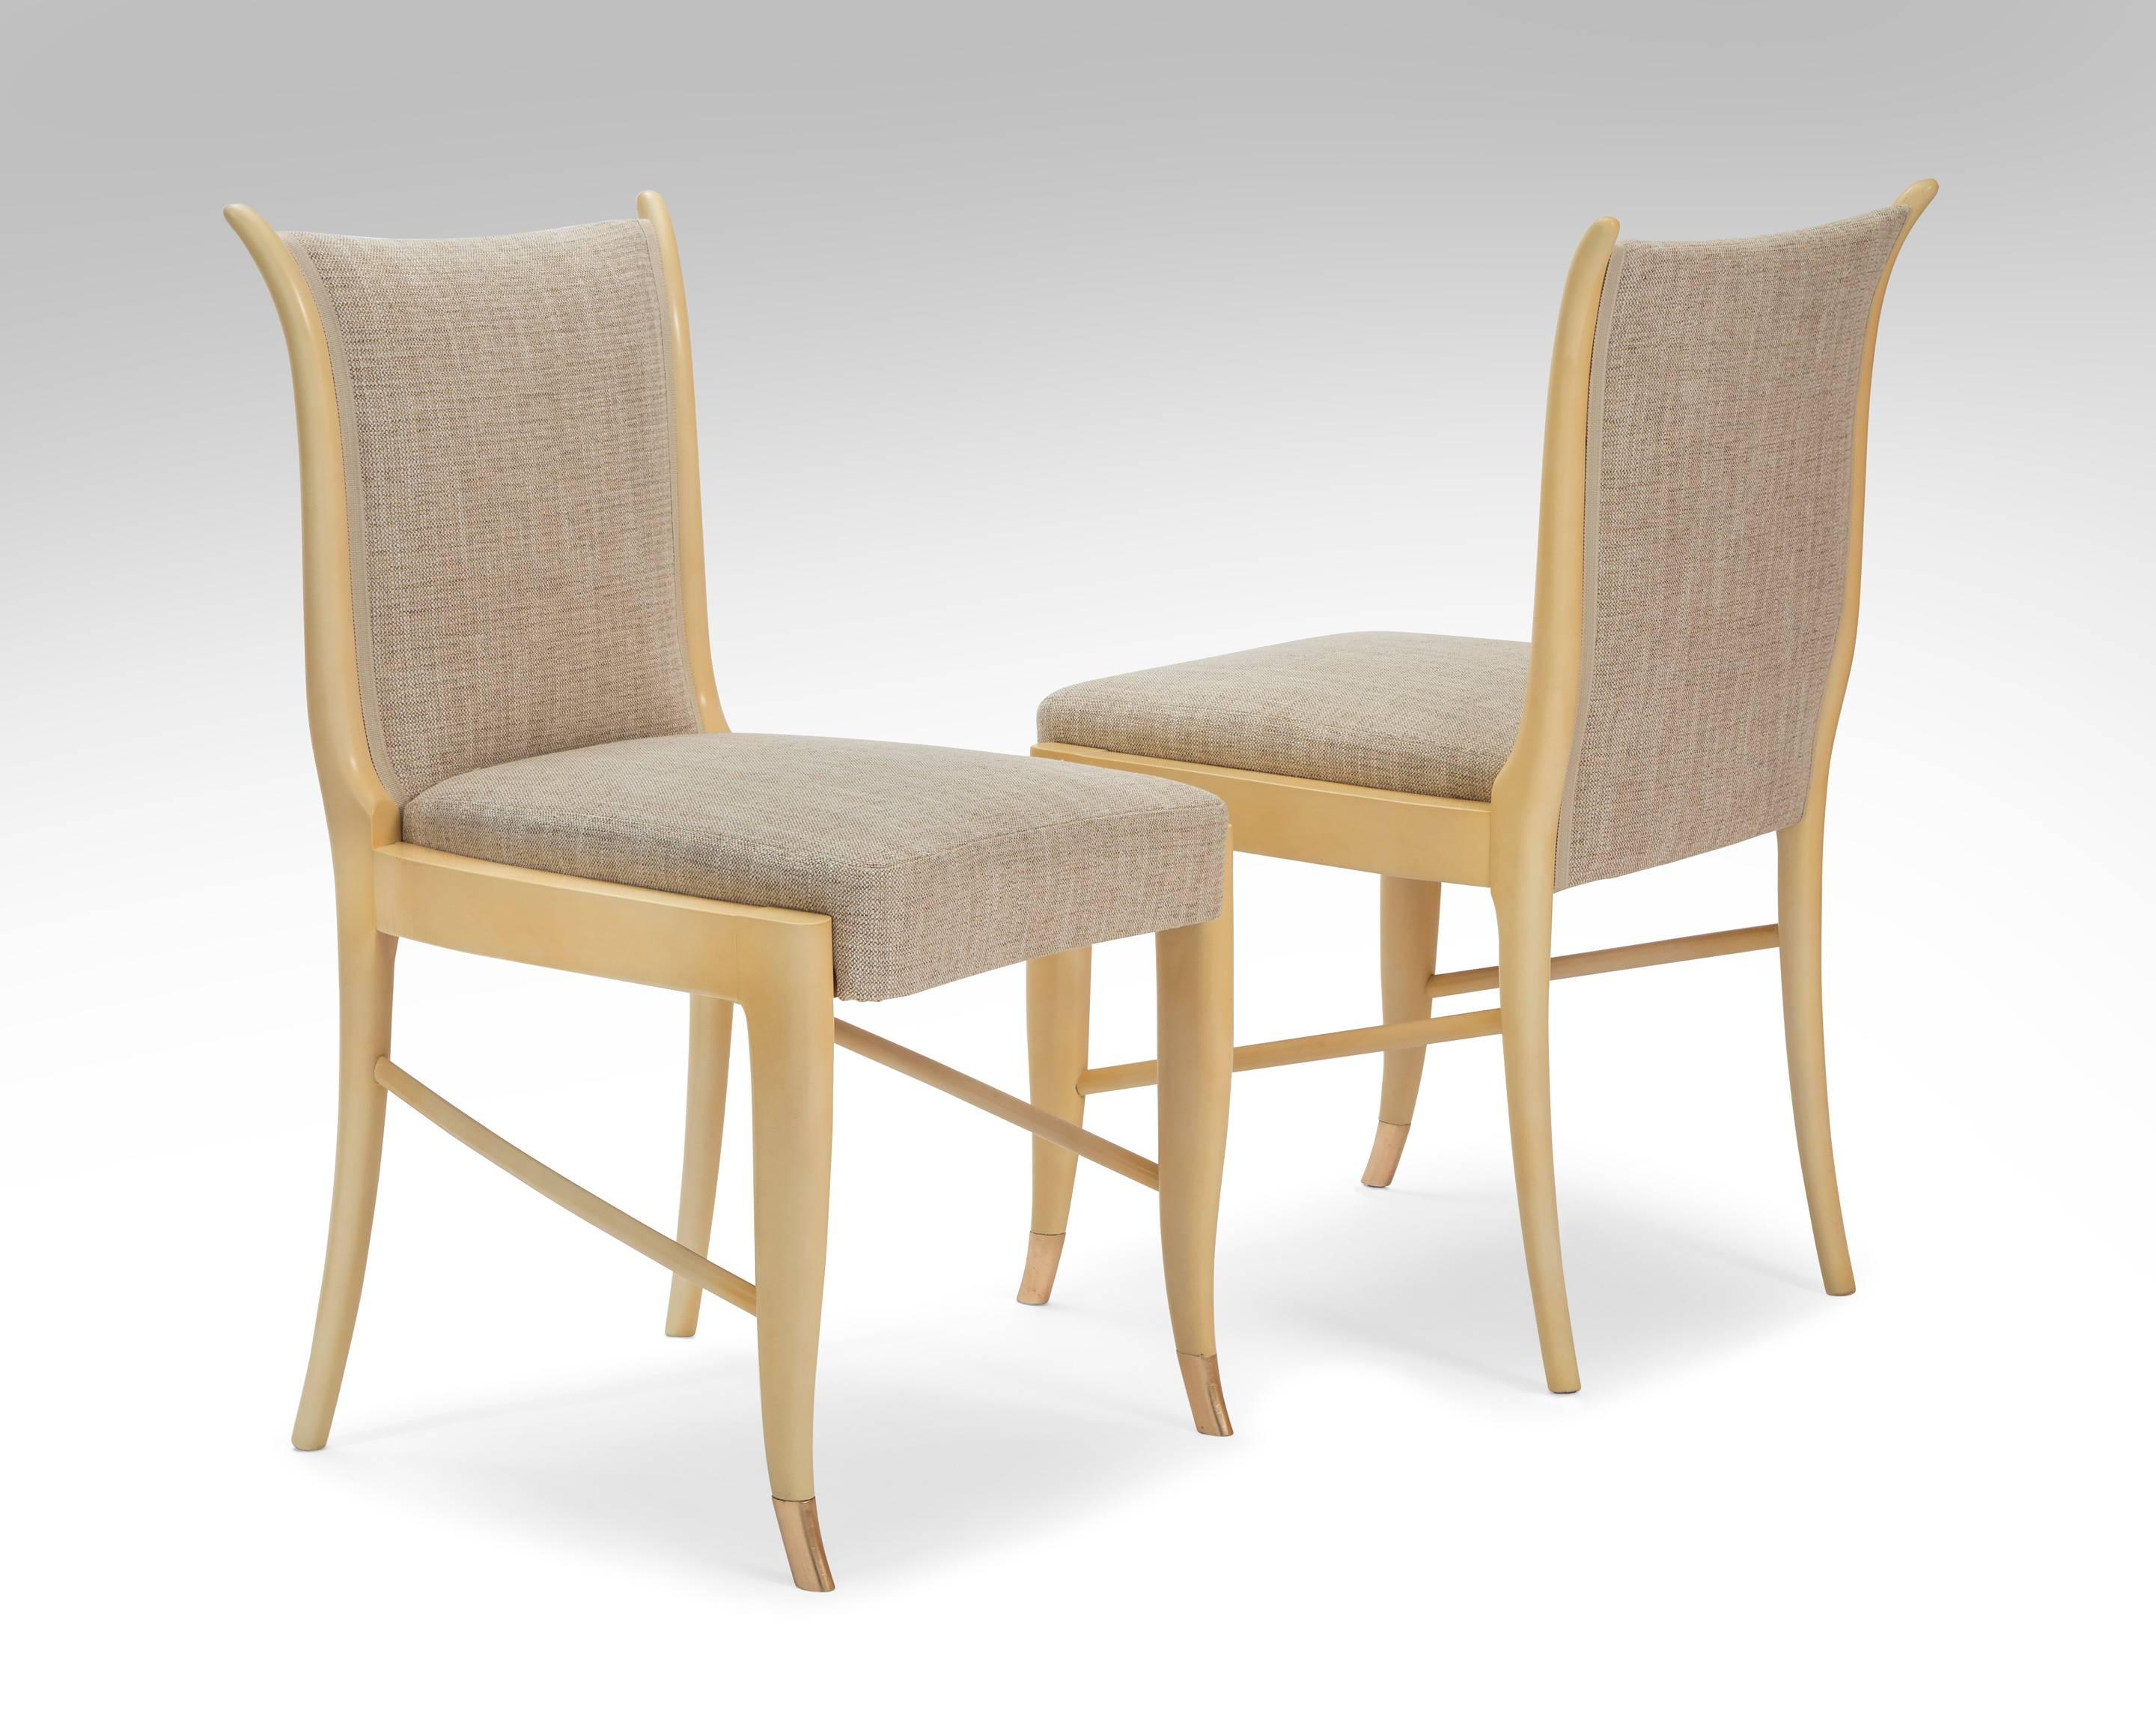 Modern Guglielmo Ulrich, Attributed, Set of 8 Italian Lacquered and Upholstered Chairs